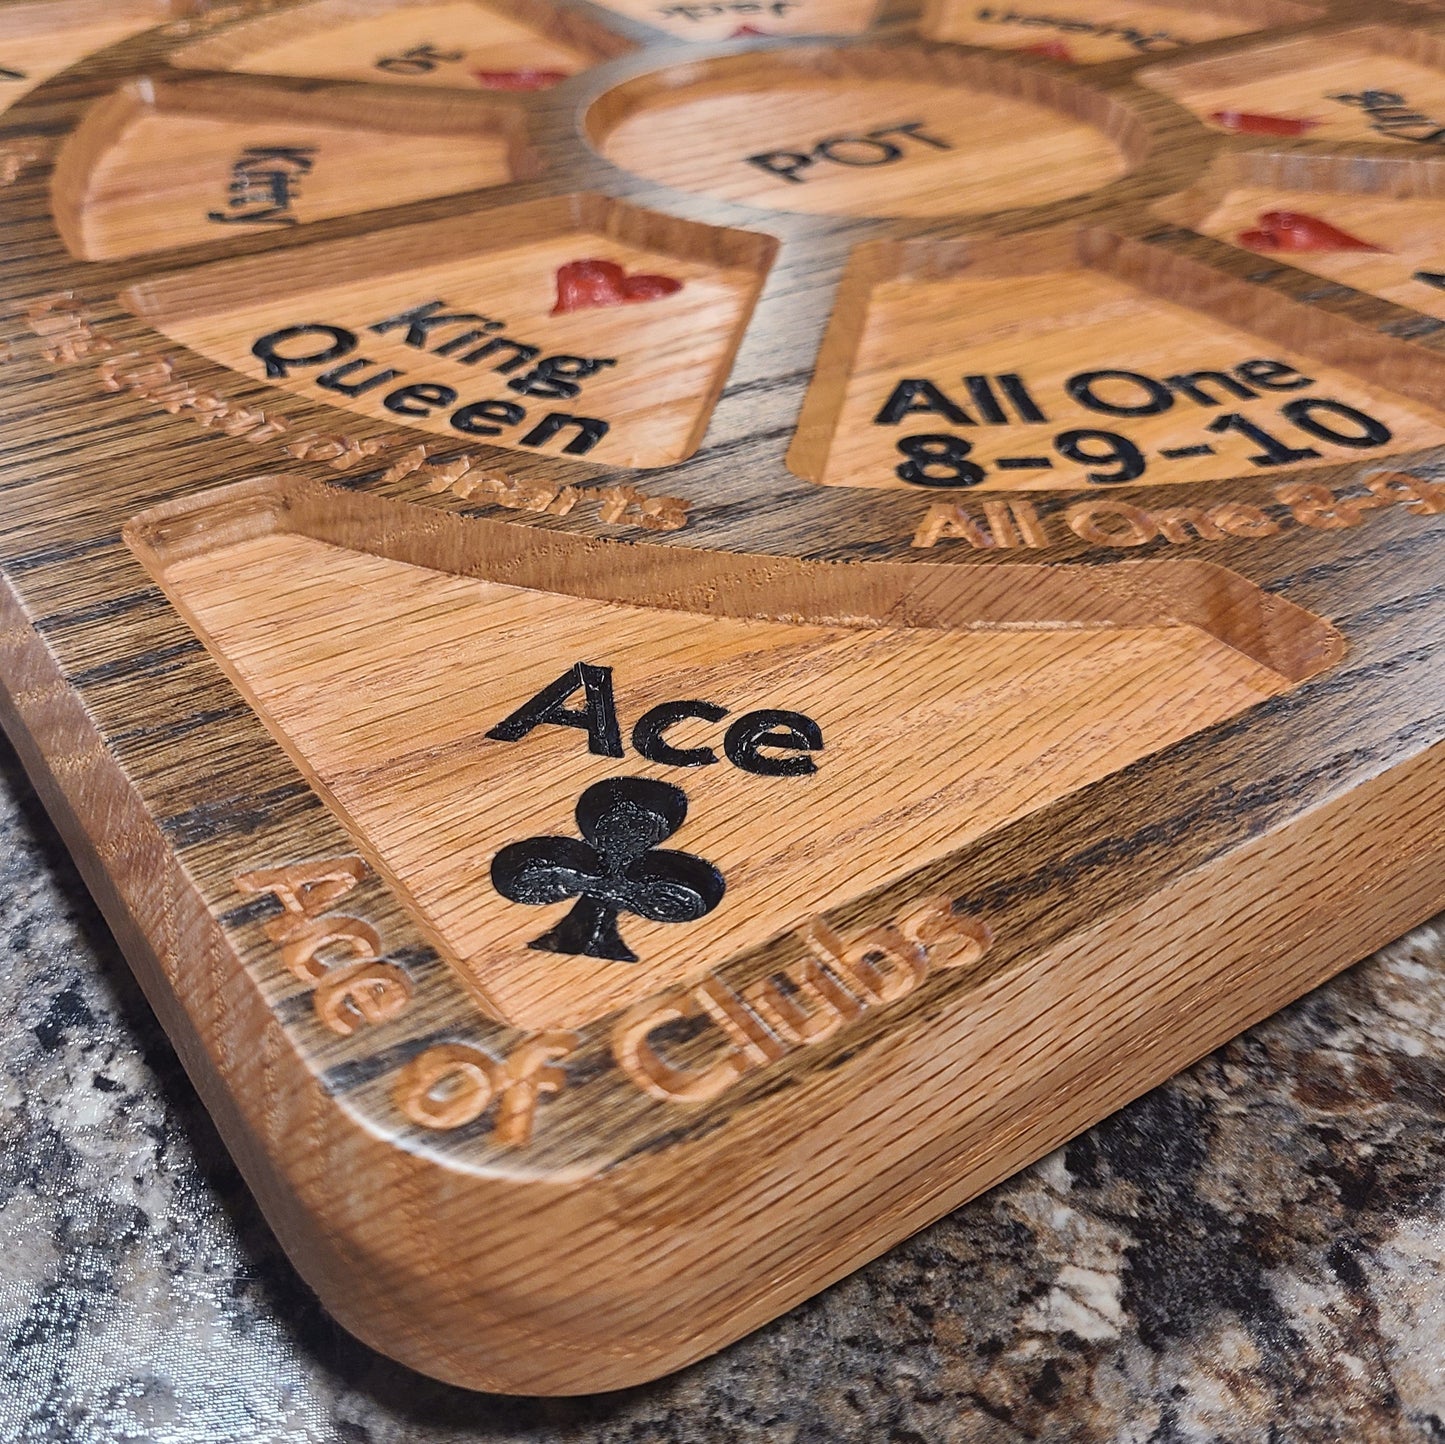 Limited Edition 16"x16" Solid Red Oak Tripoli, Michigan Rummy or Rummoli Board (6-7-8 without Turn Table)